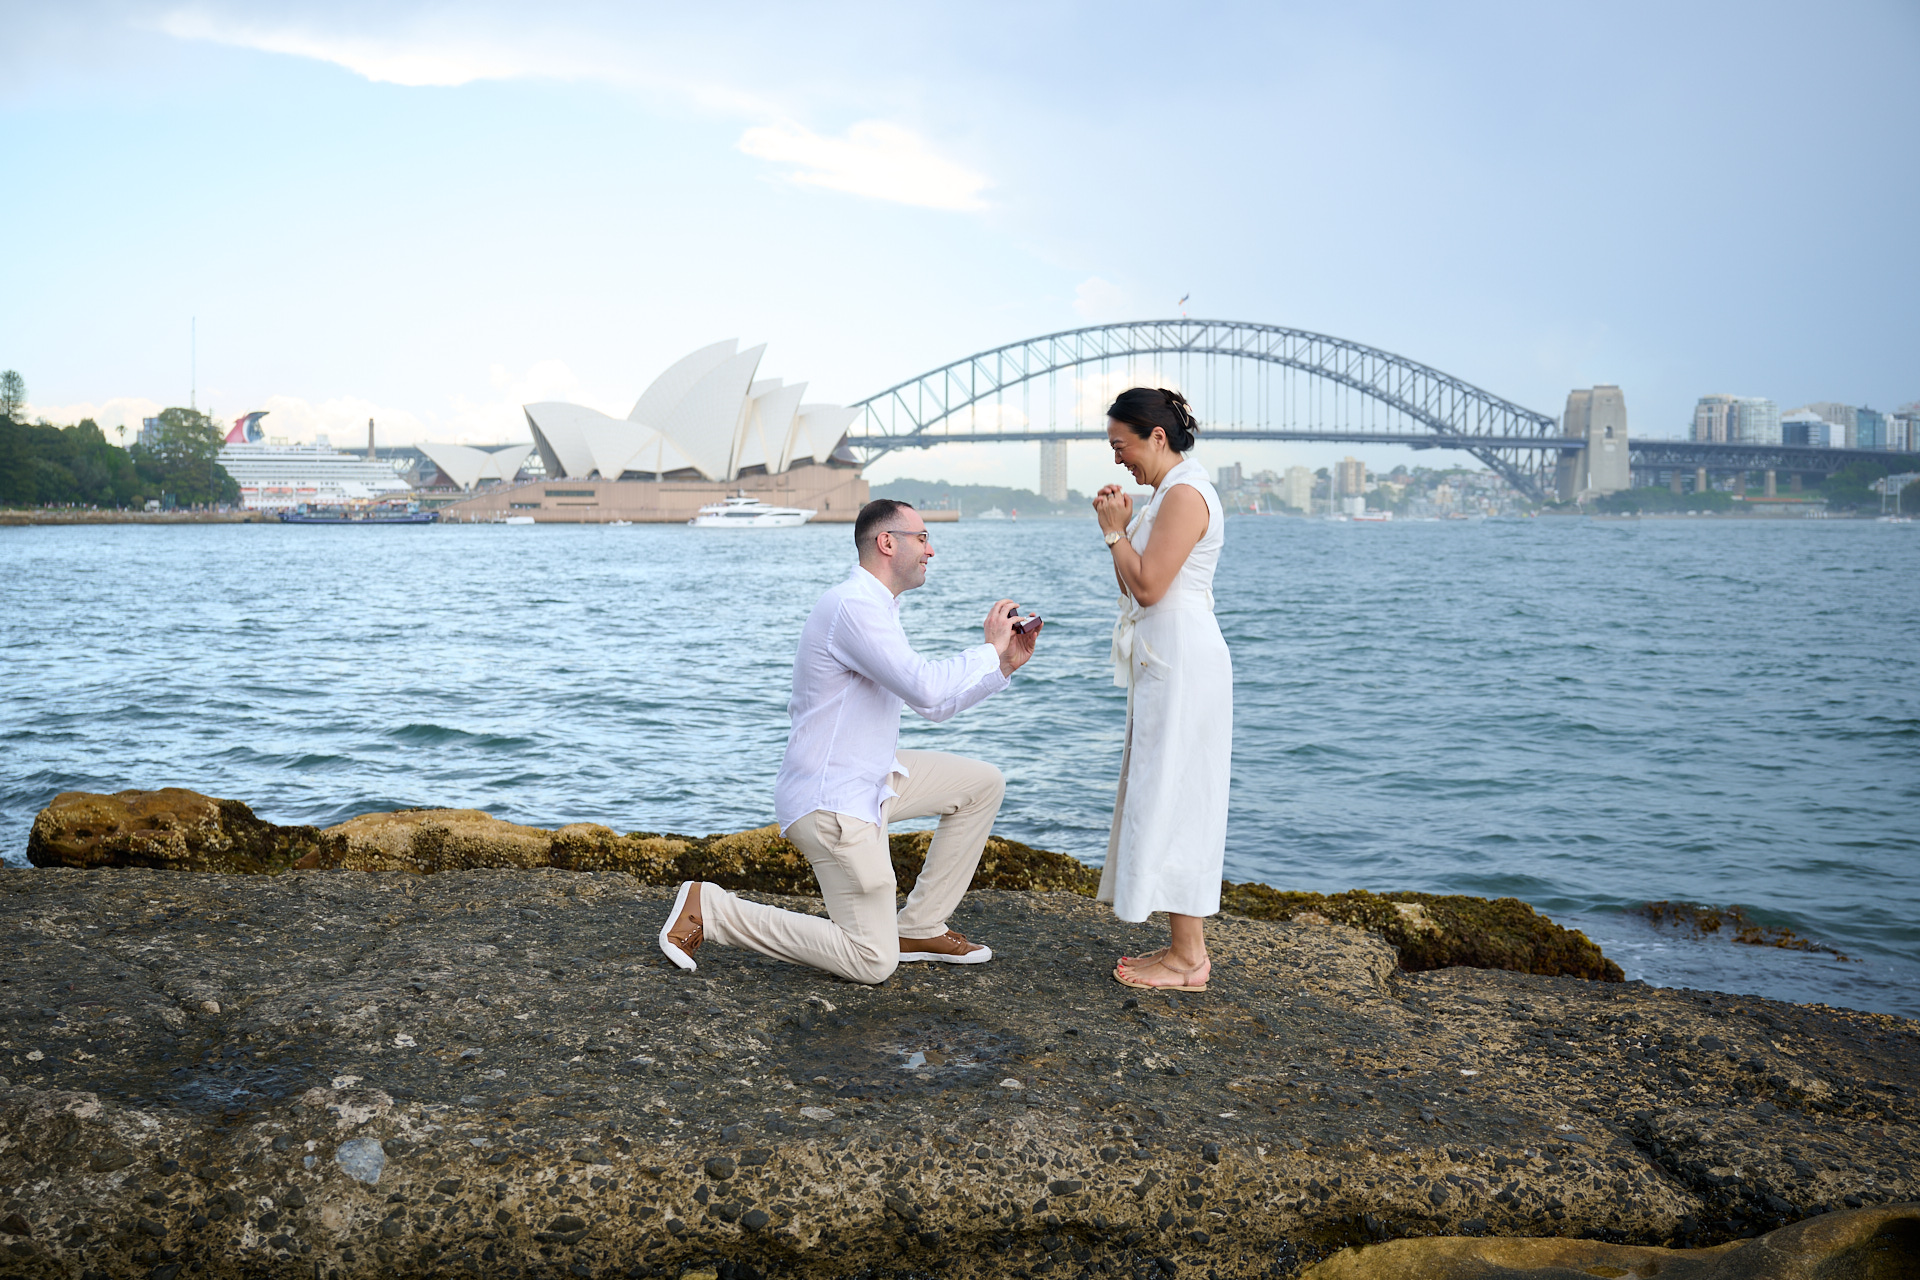 Marriage Proposal photo from Mrs Macquaries Point - Photography By orlandosydney.com